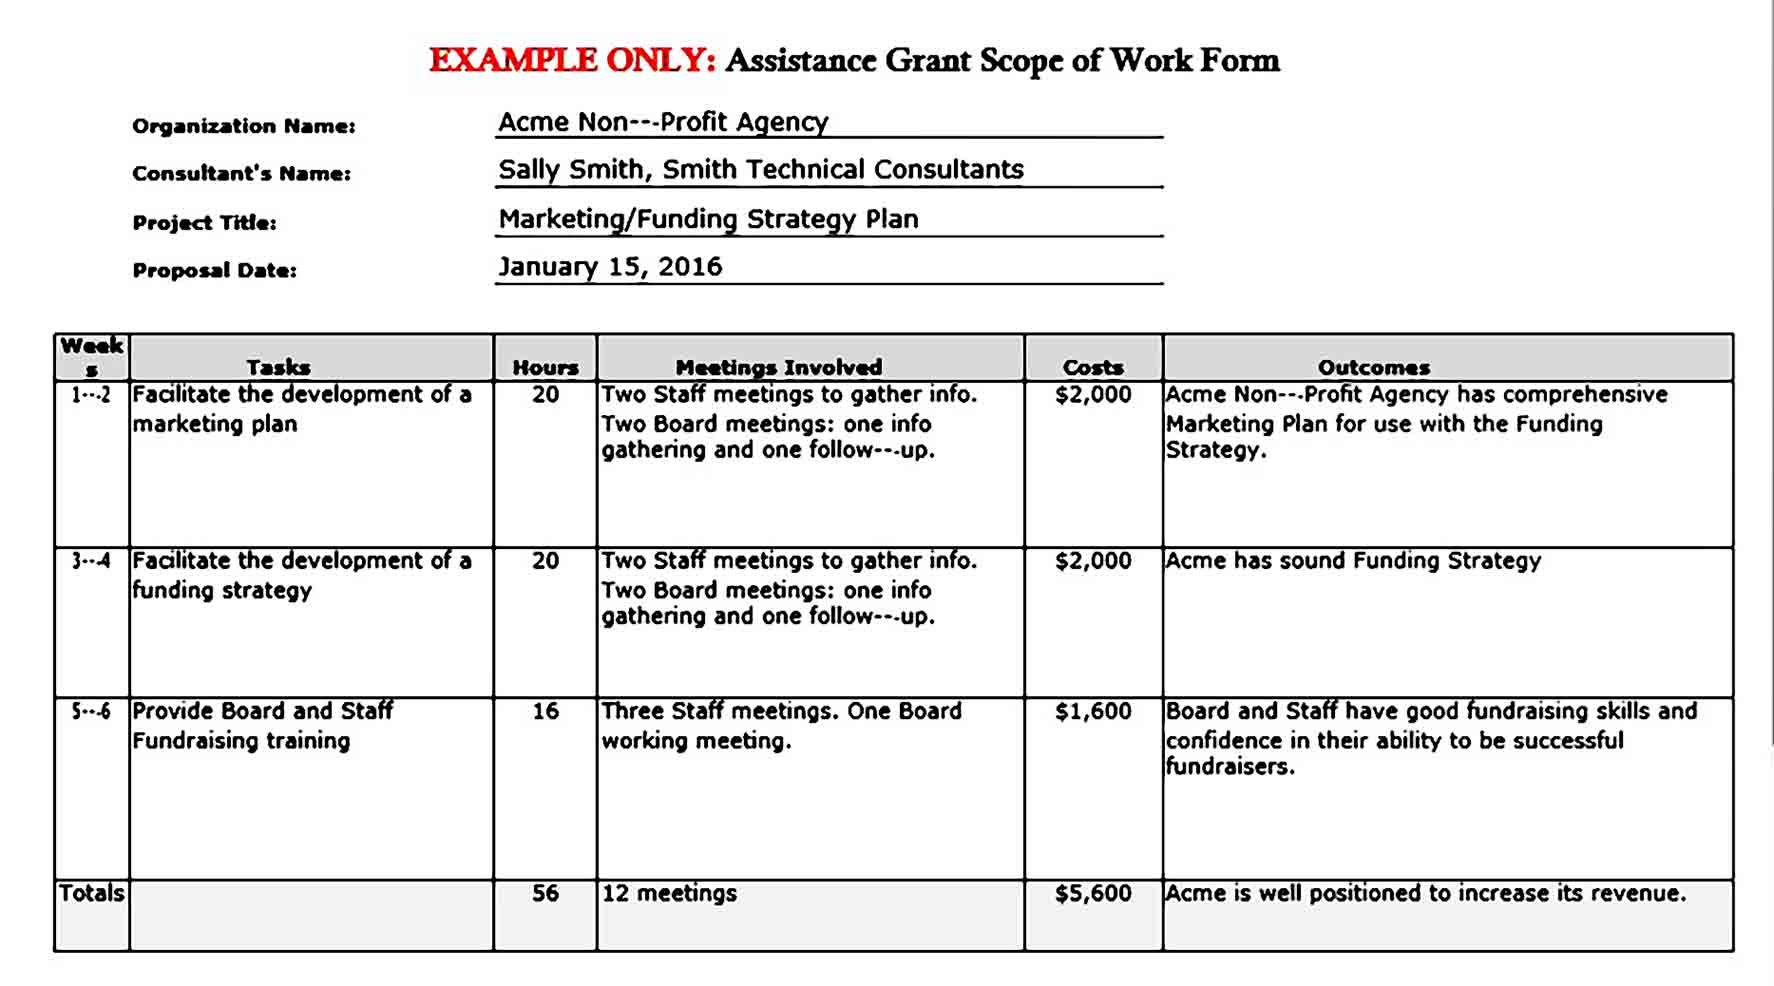 Assistance Grant Example Project Scope of Work Form